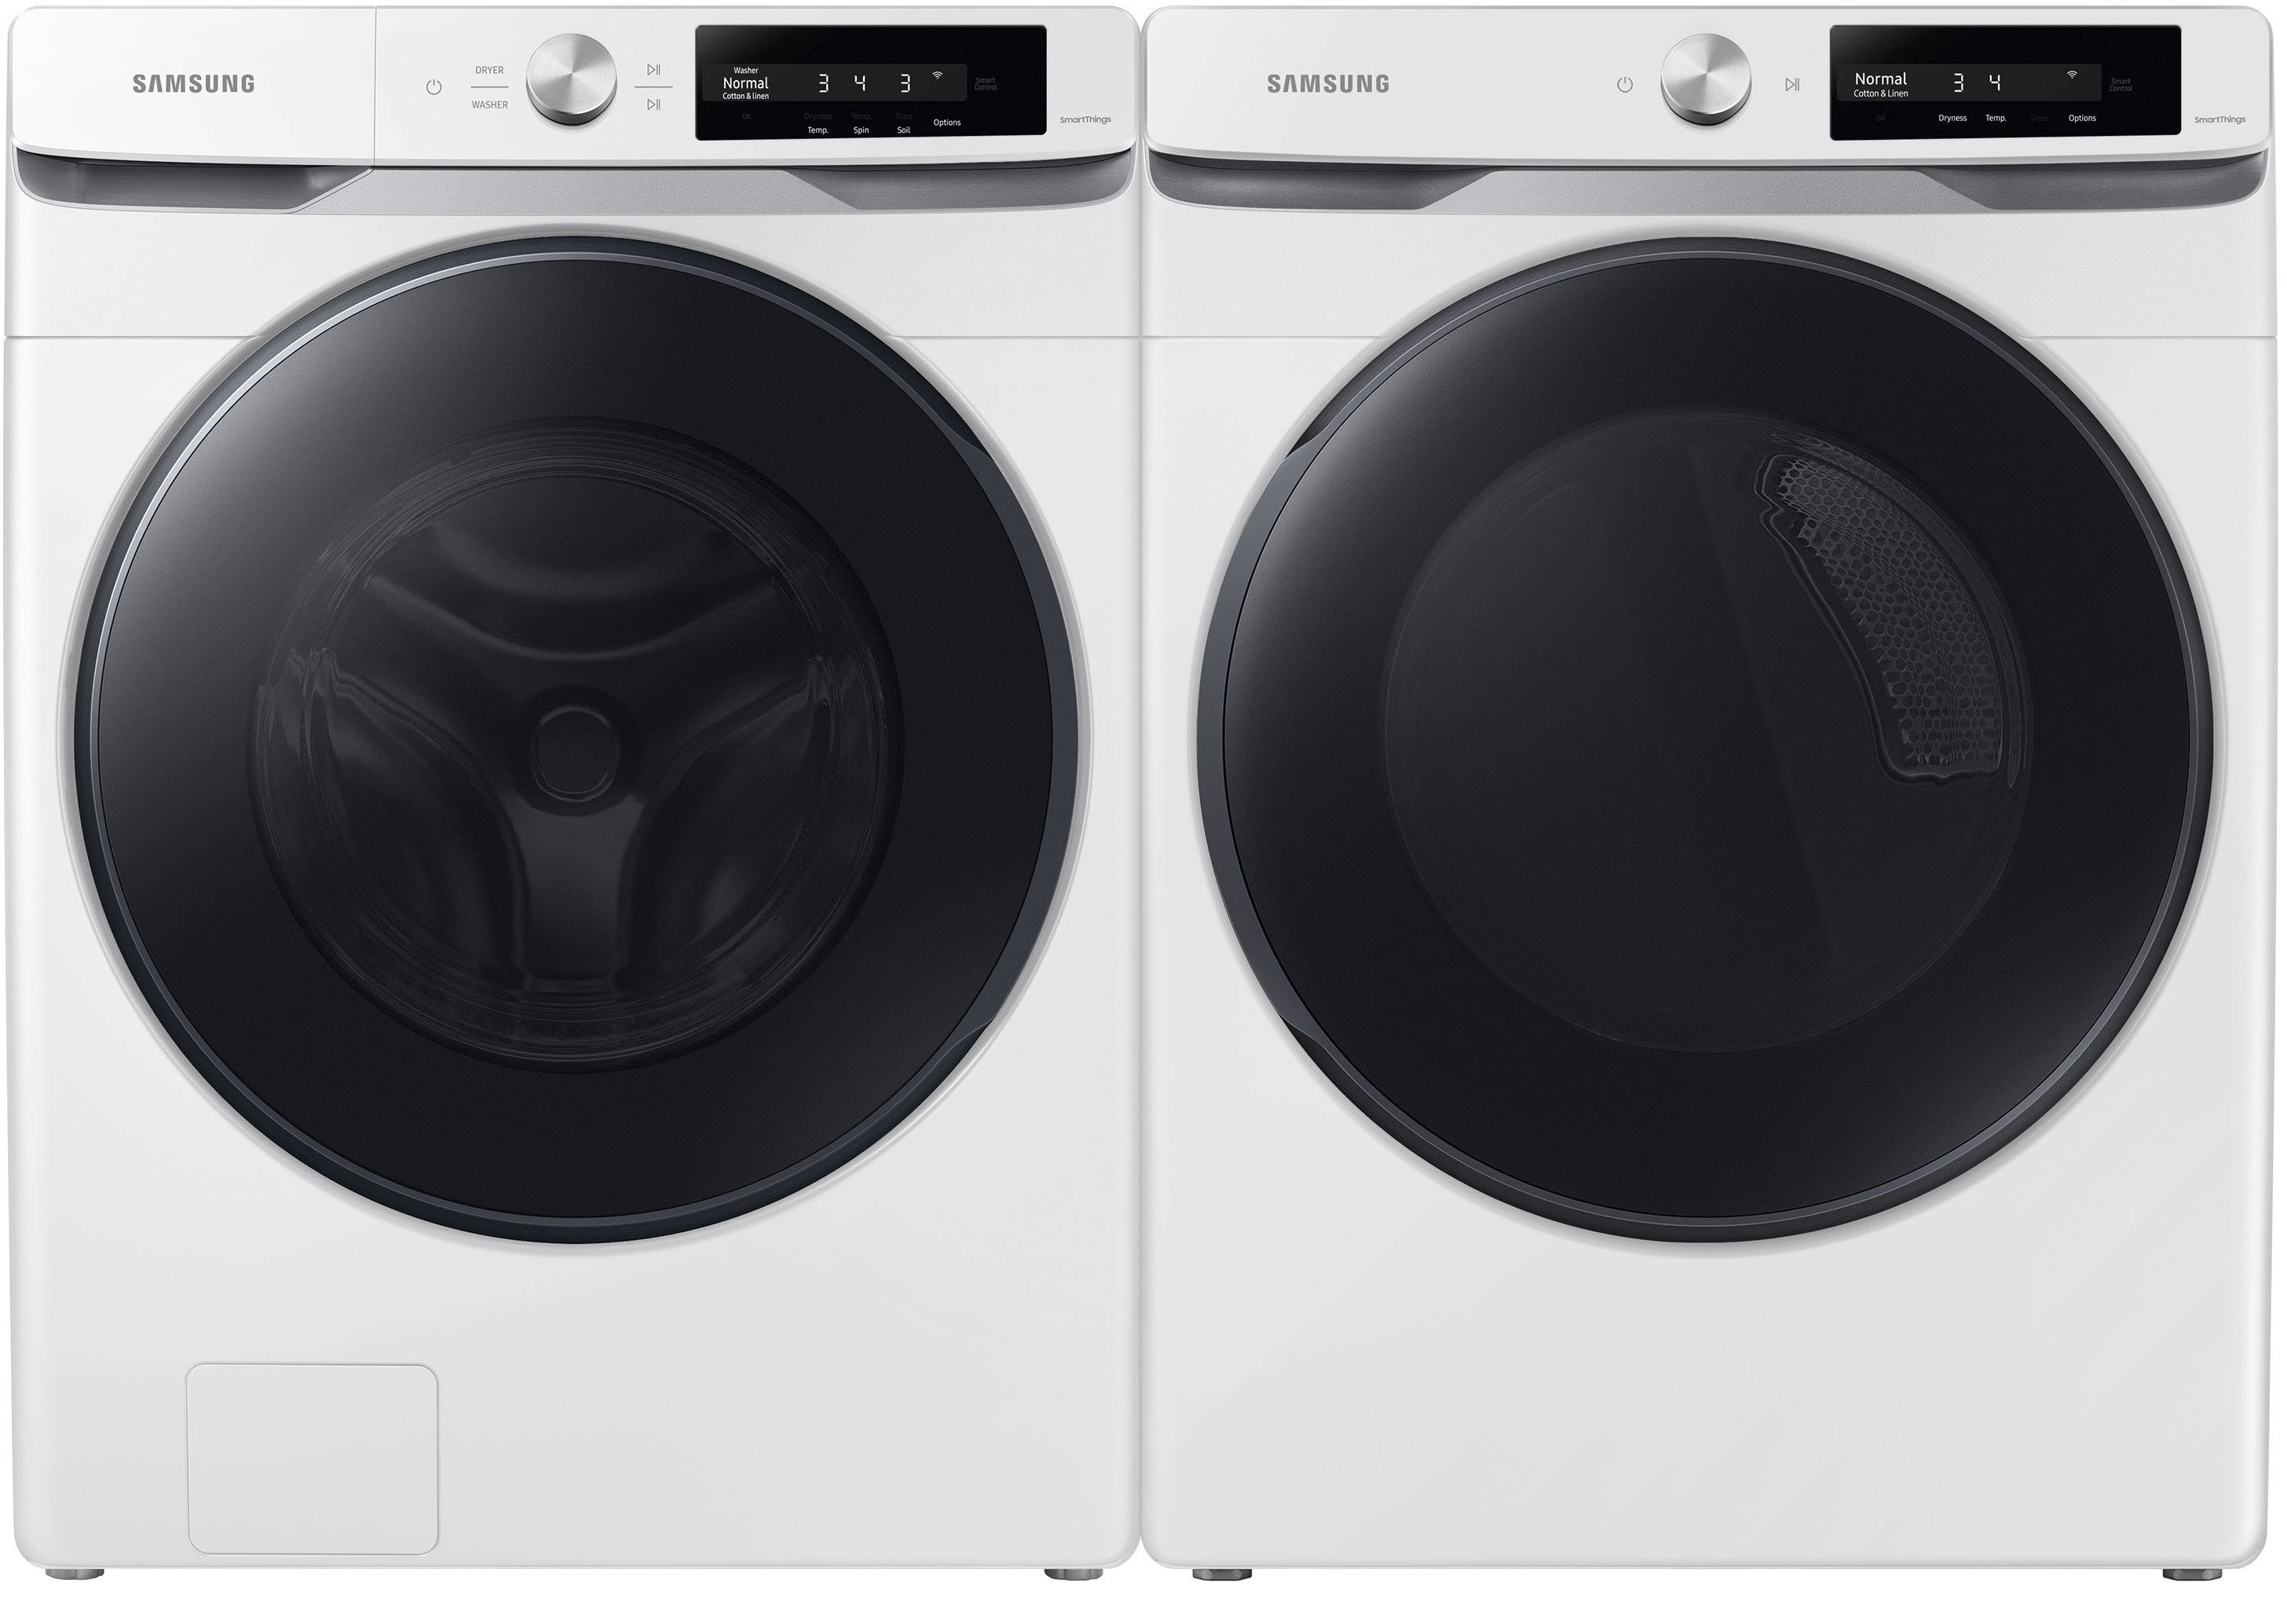 Samsung - 4.5 cu. ft. Large Capacity Smart Dial Front Load Washer & Samsung - 7.5 cu. ft. Smart Dial Electric Dryer with Super Speed Dry - White